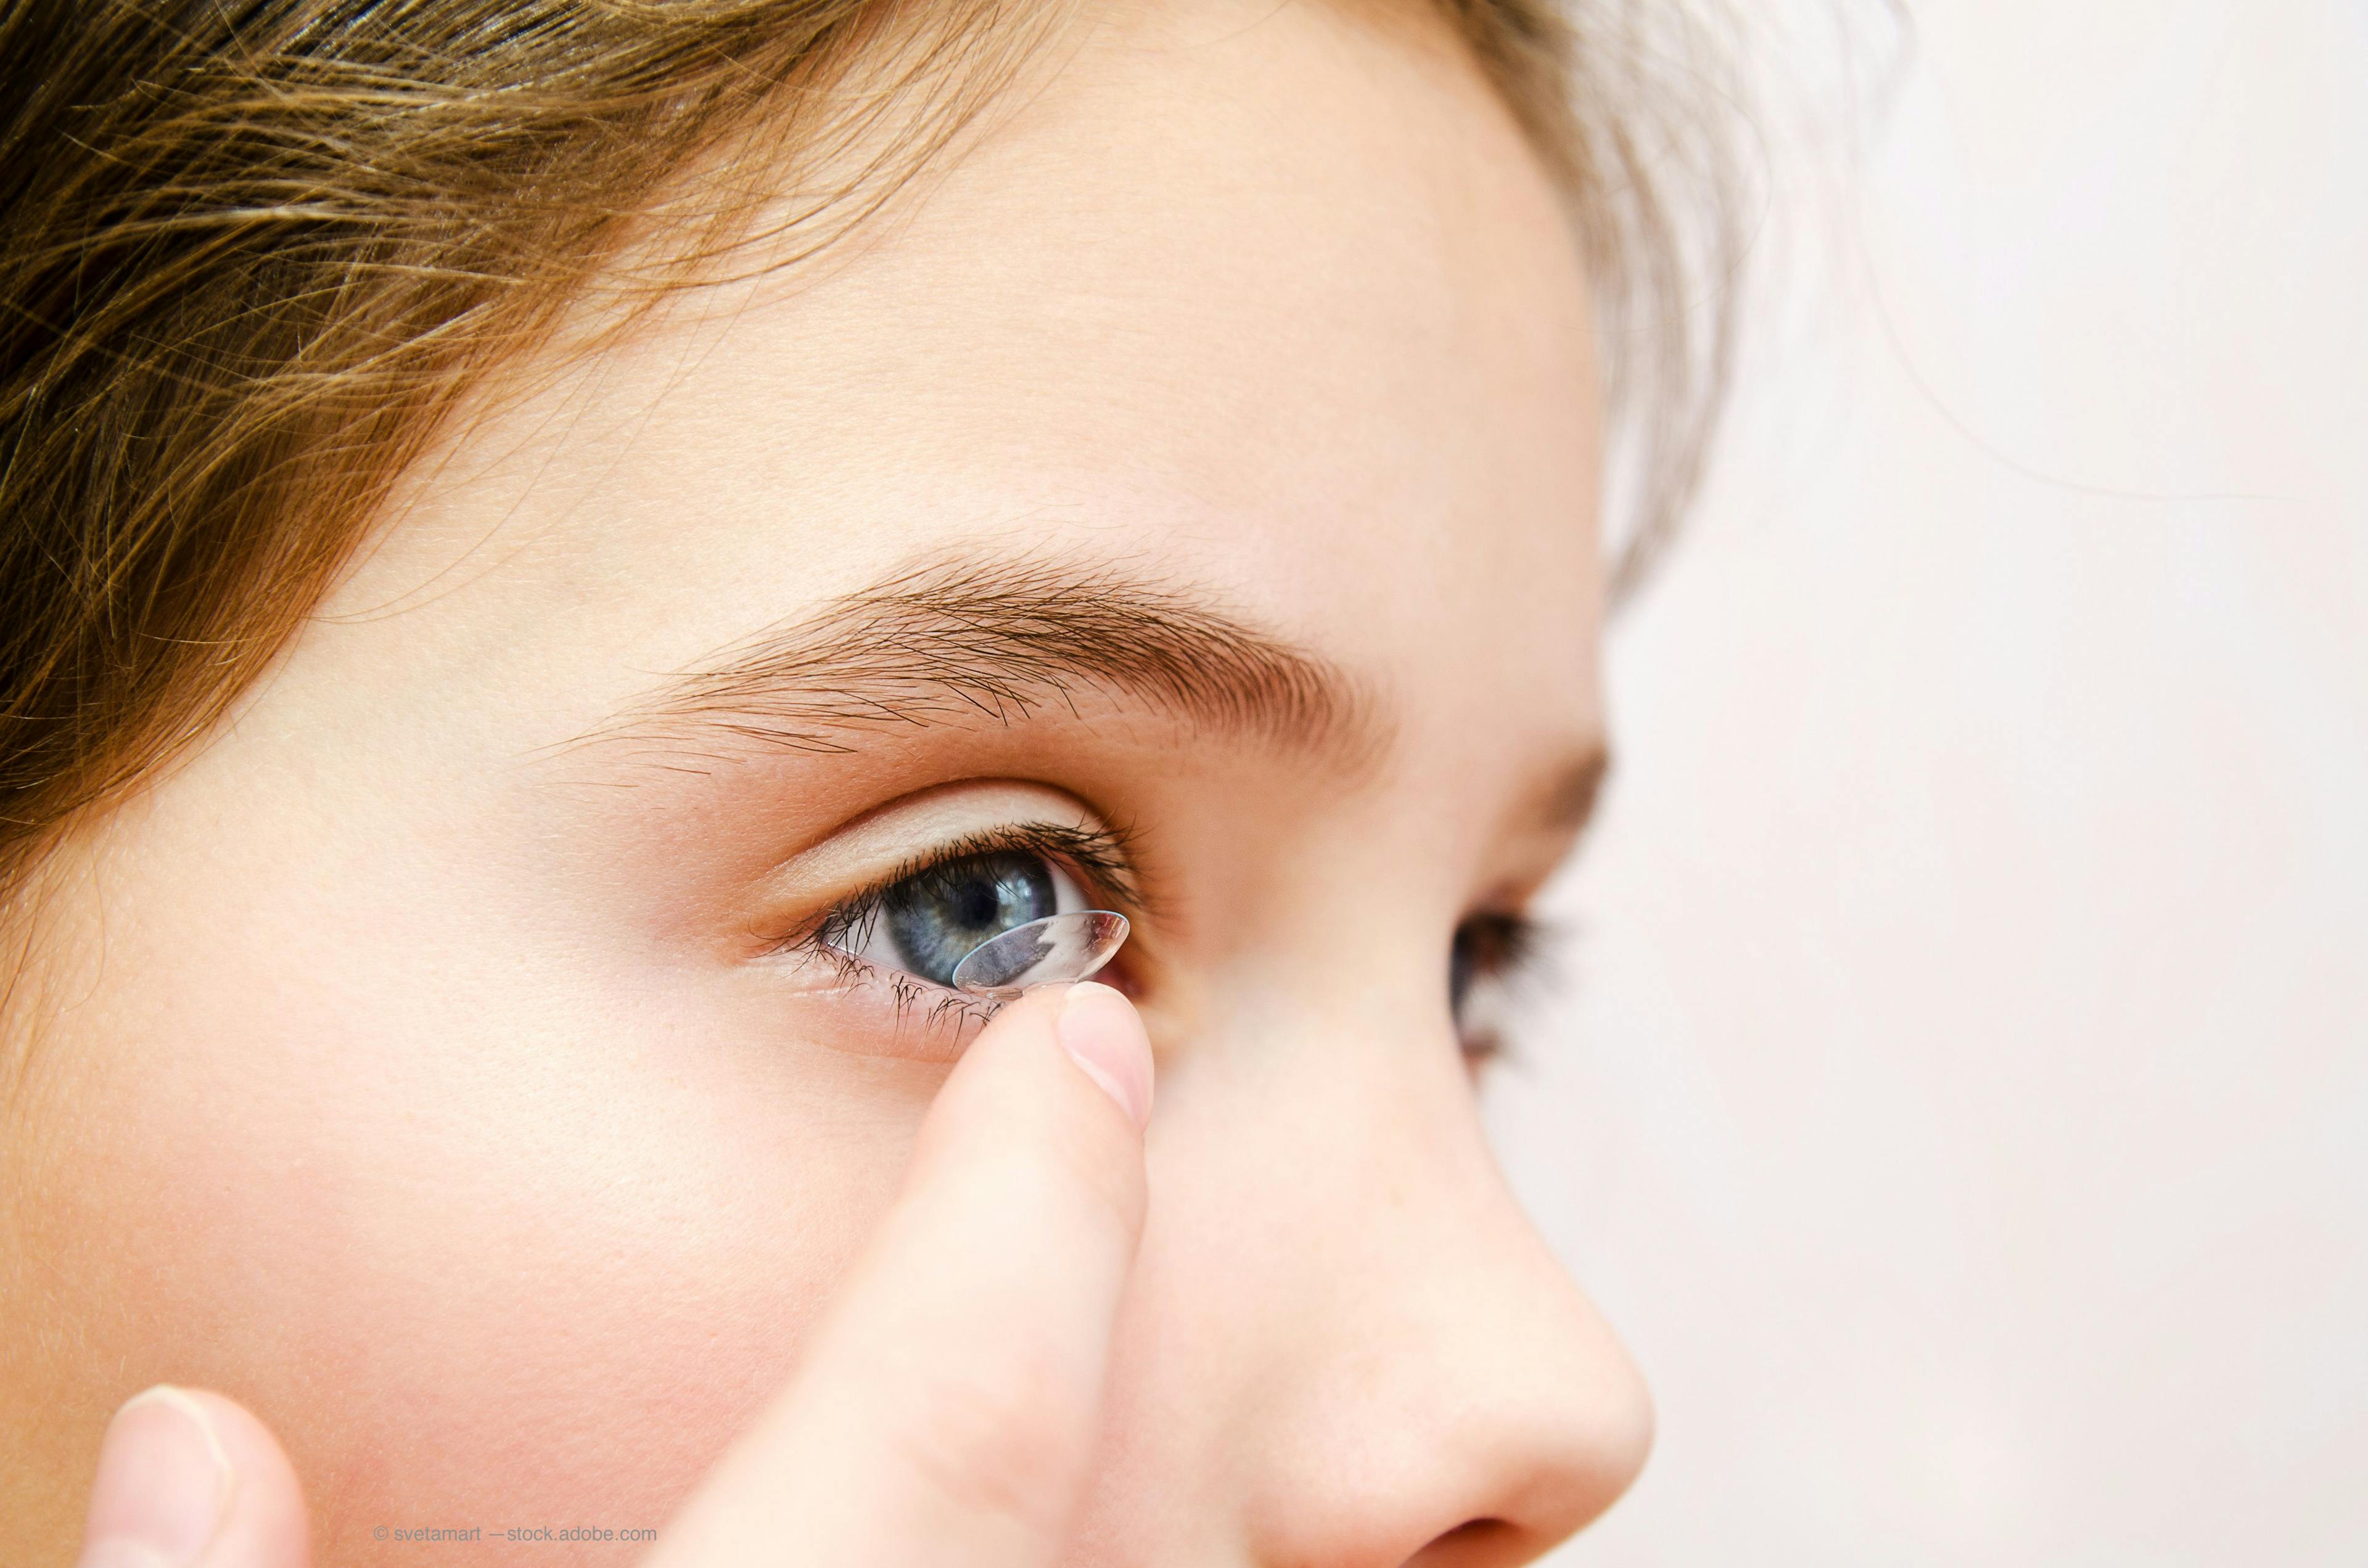 4 tips for pediatric contact lens fittings